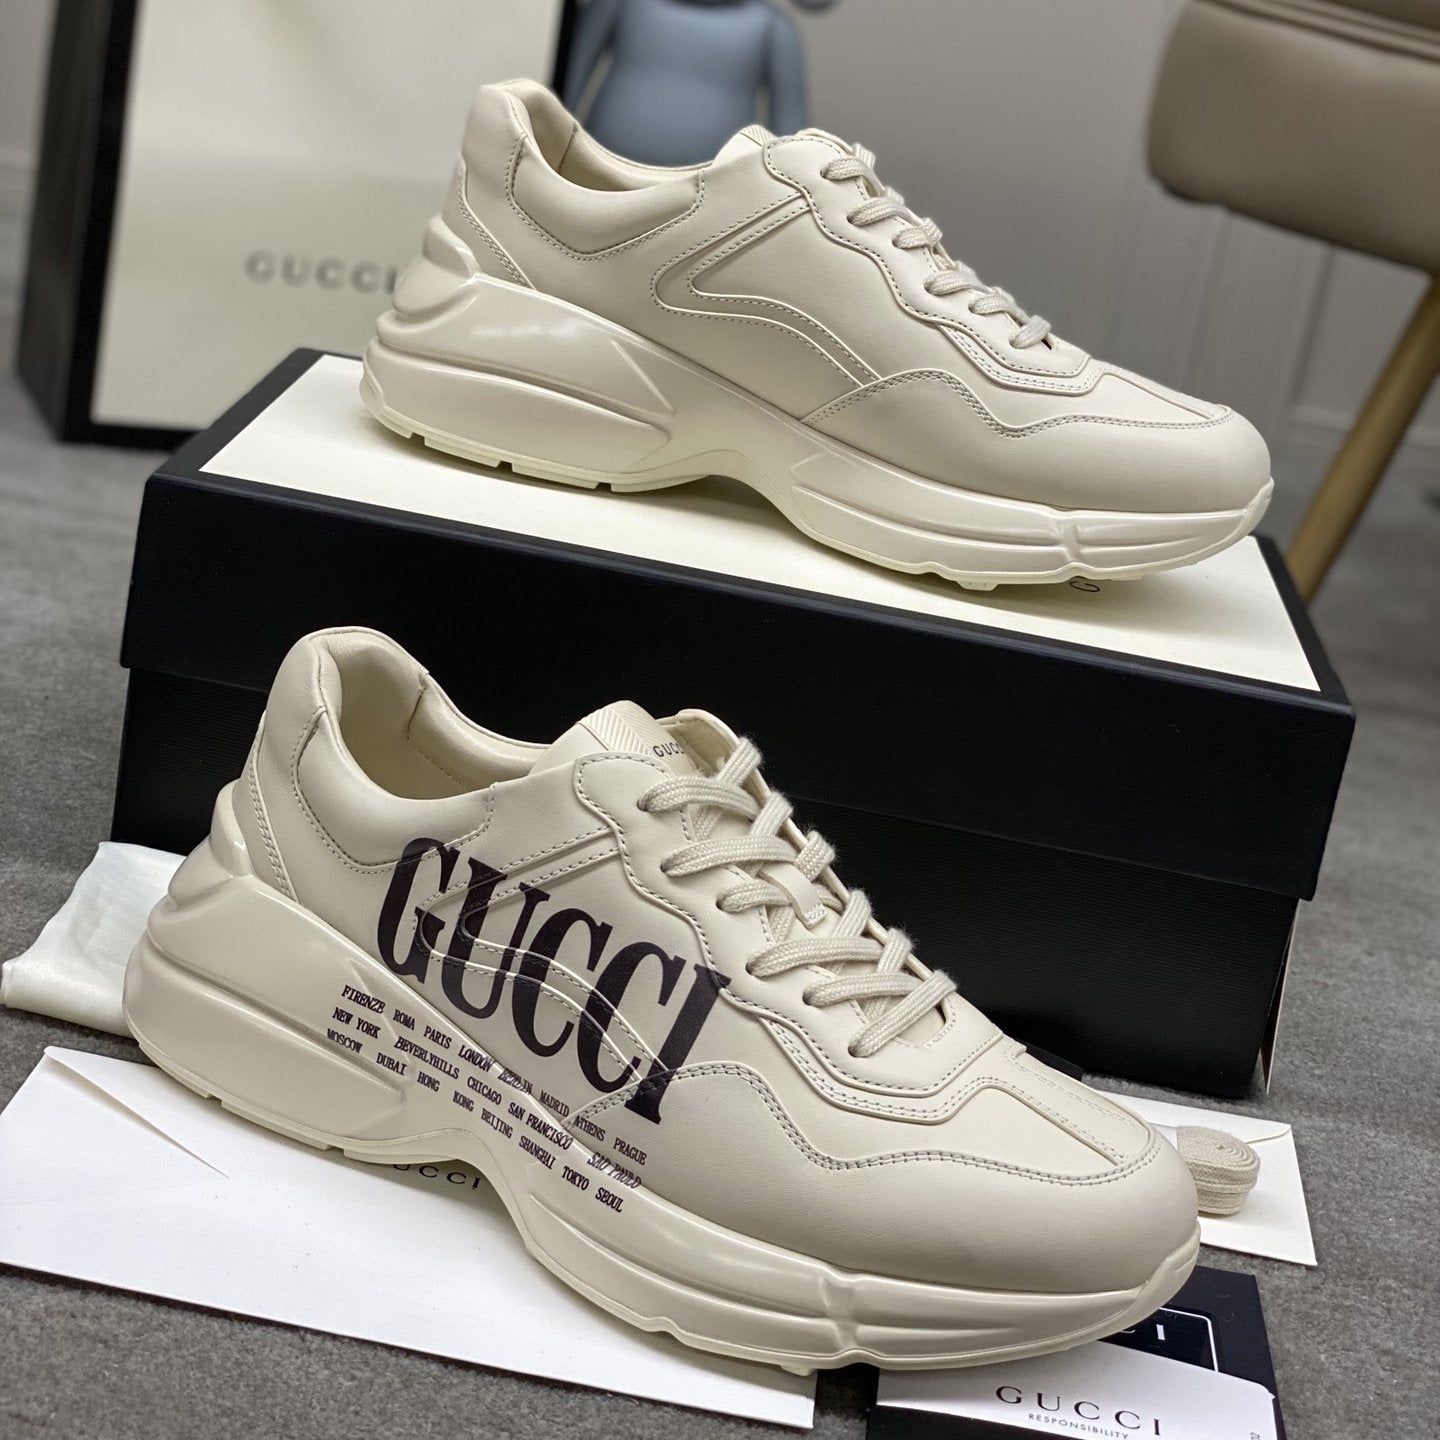 GG Rhyton casual men's and women's sneakers shoes